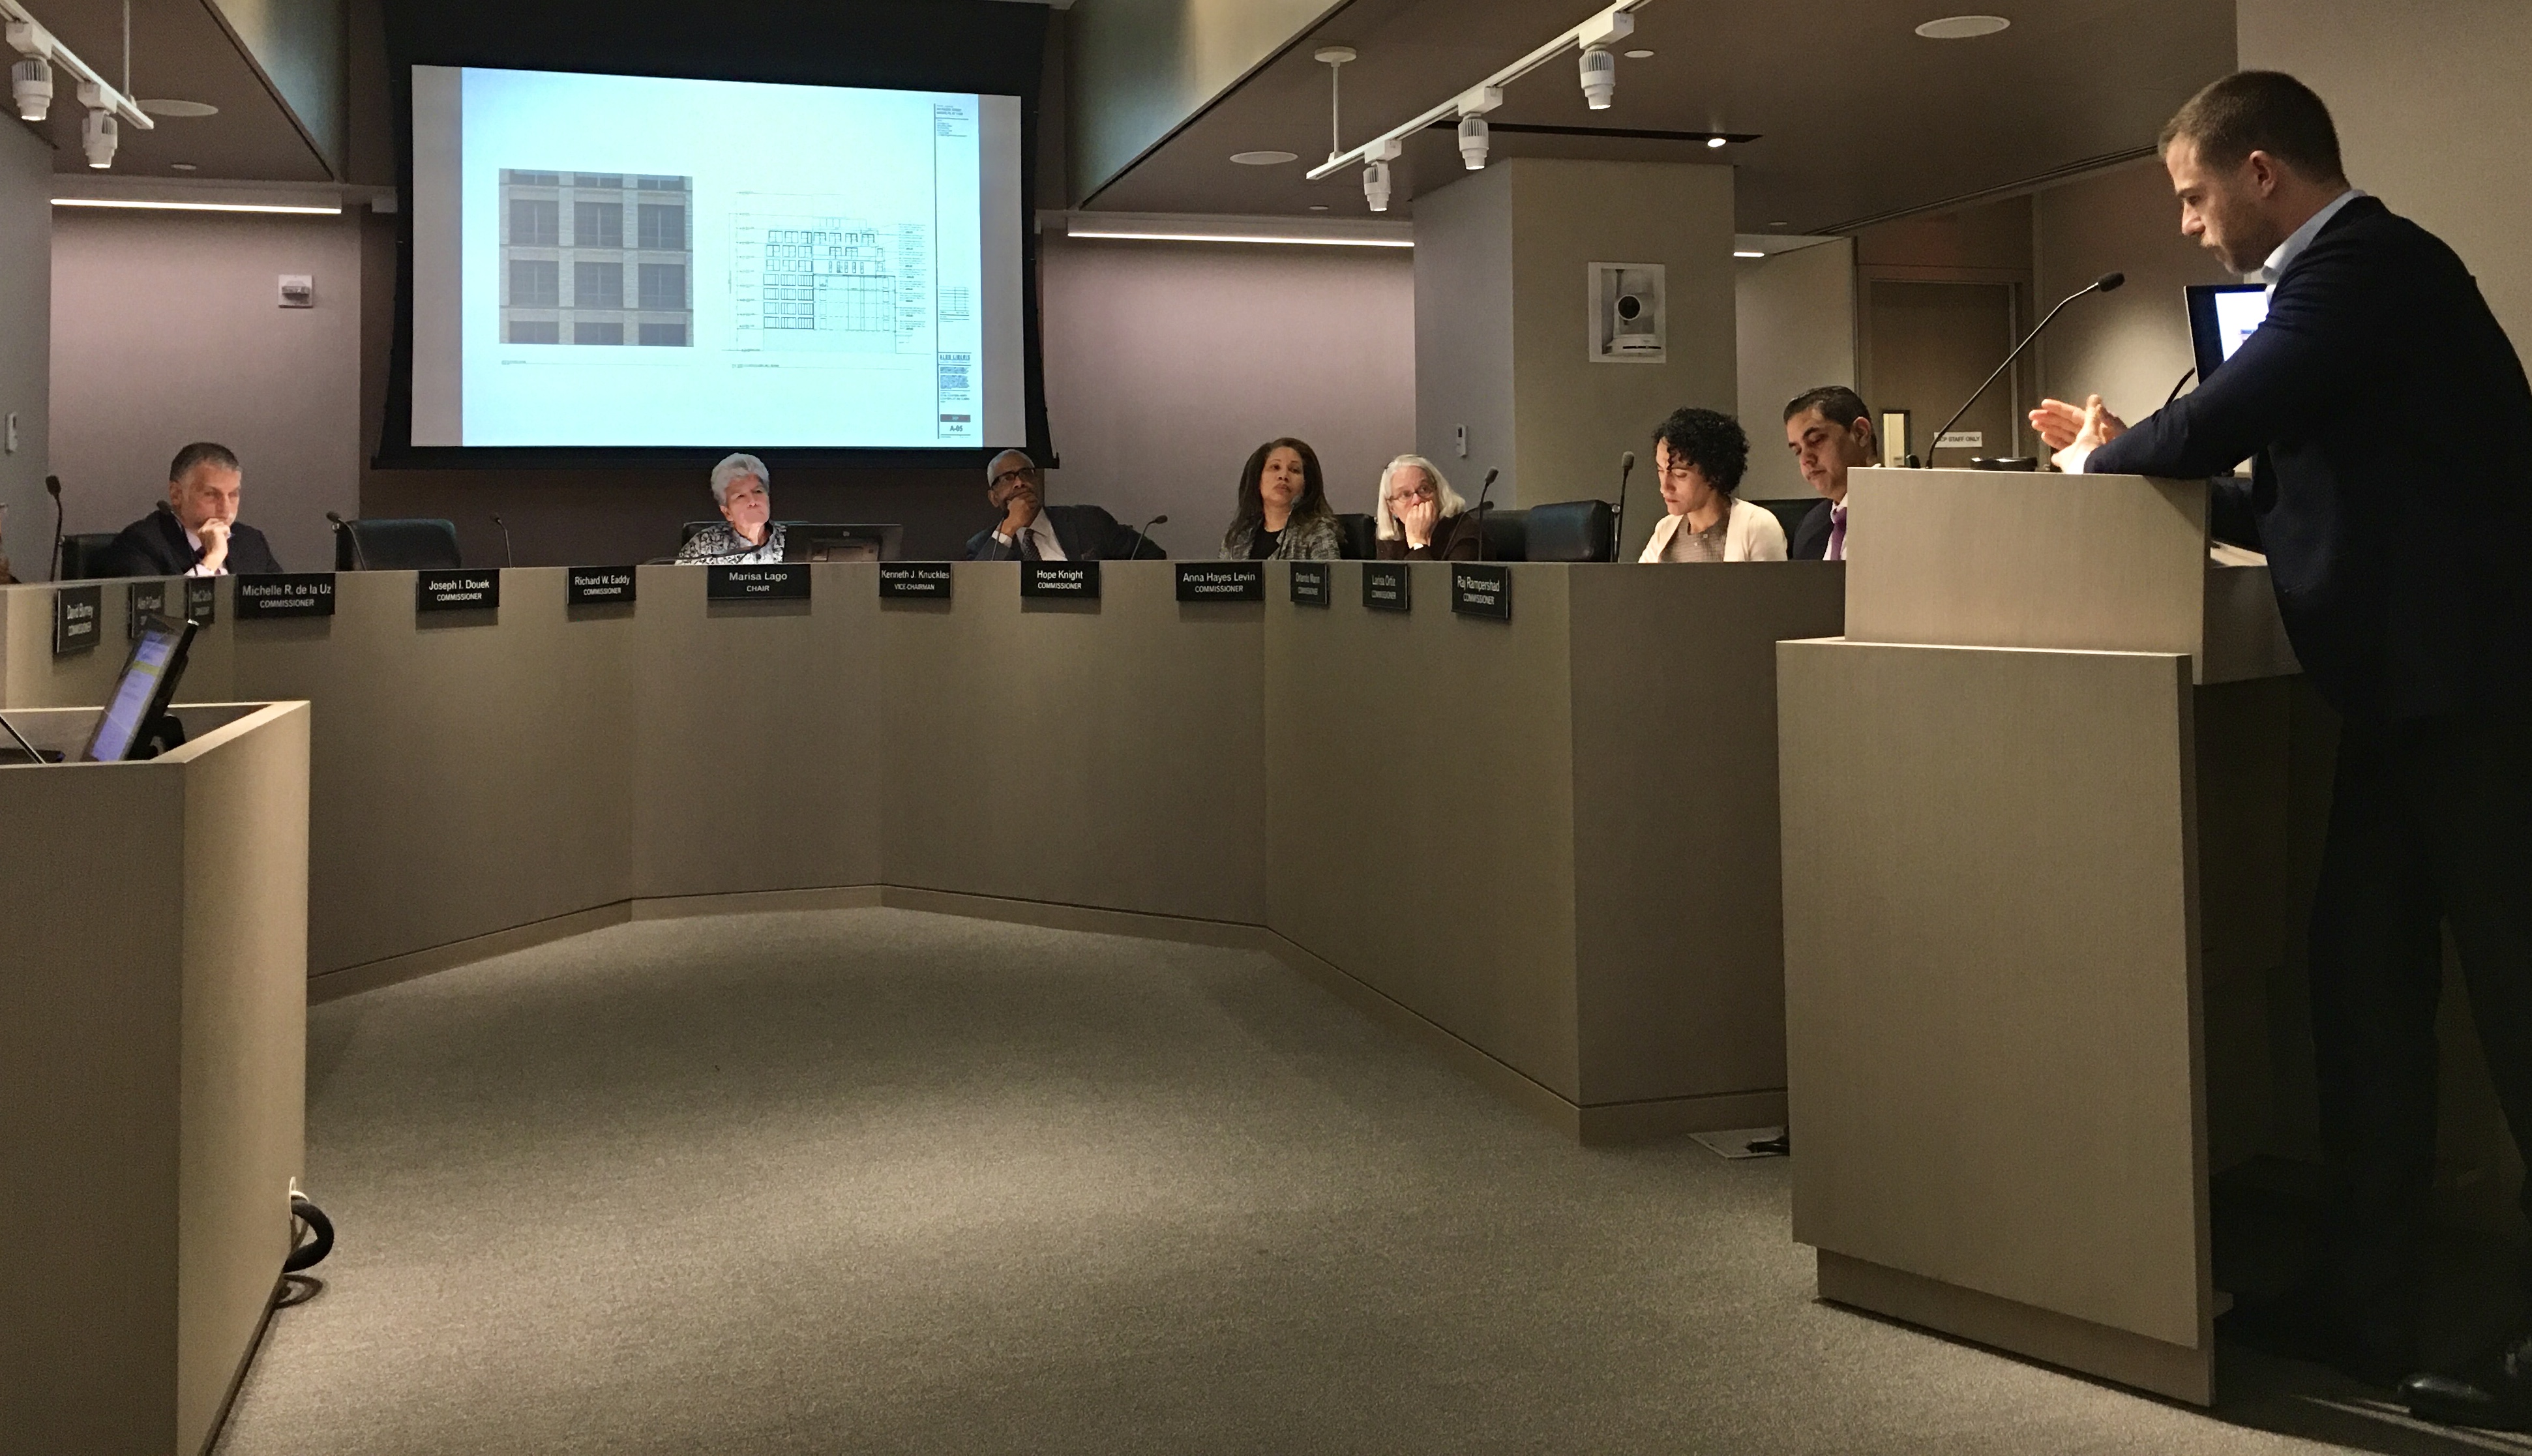 Elie Pariente tells the City Planning Commission about his development plans for 985 Pacific St. Photo: Lore Croghan/Brooklyn Eagle